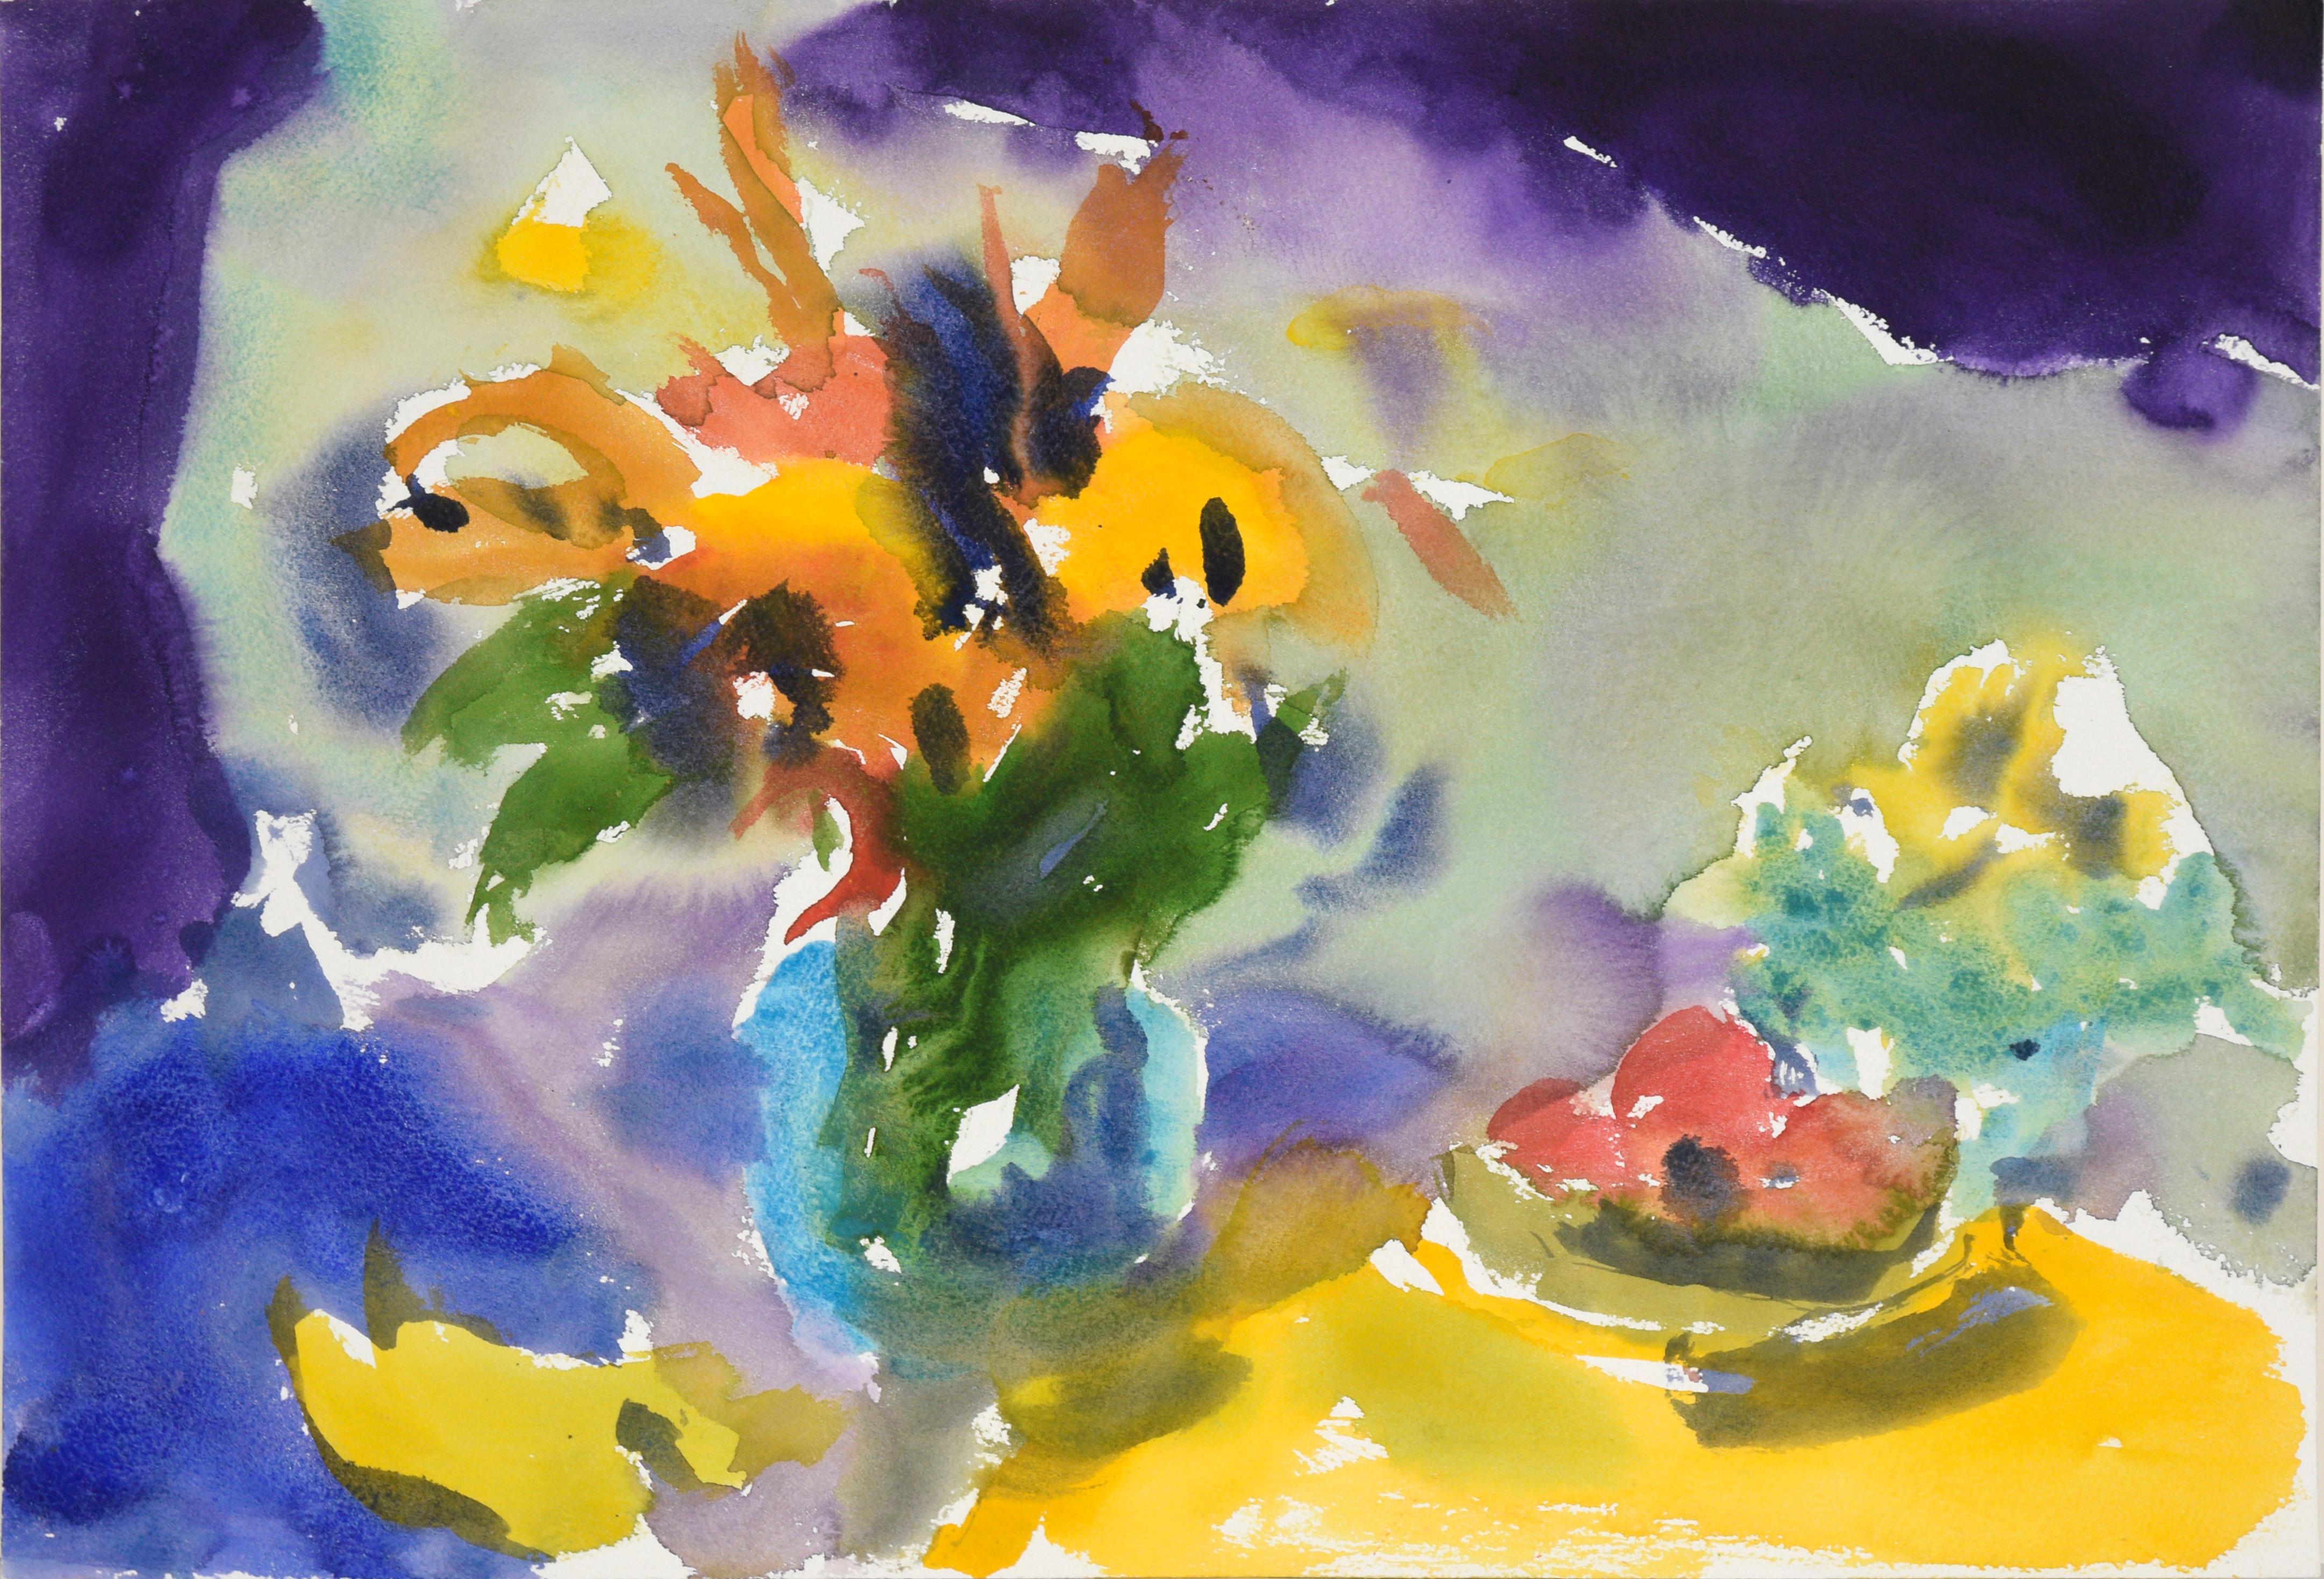 Les Anderson Interior Art - Abstract Still Life with Bouquets and Fruit in Watercolor on Paper